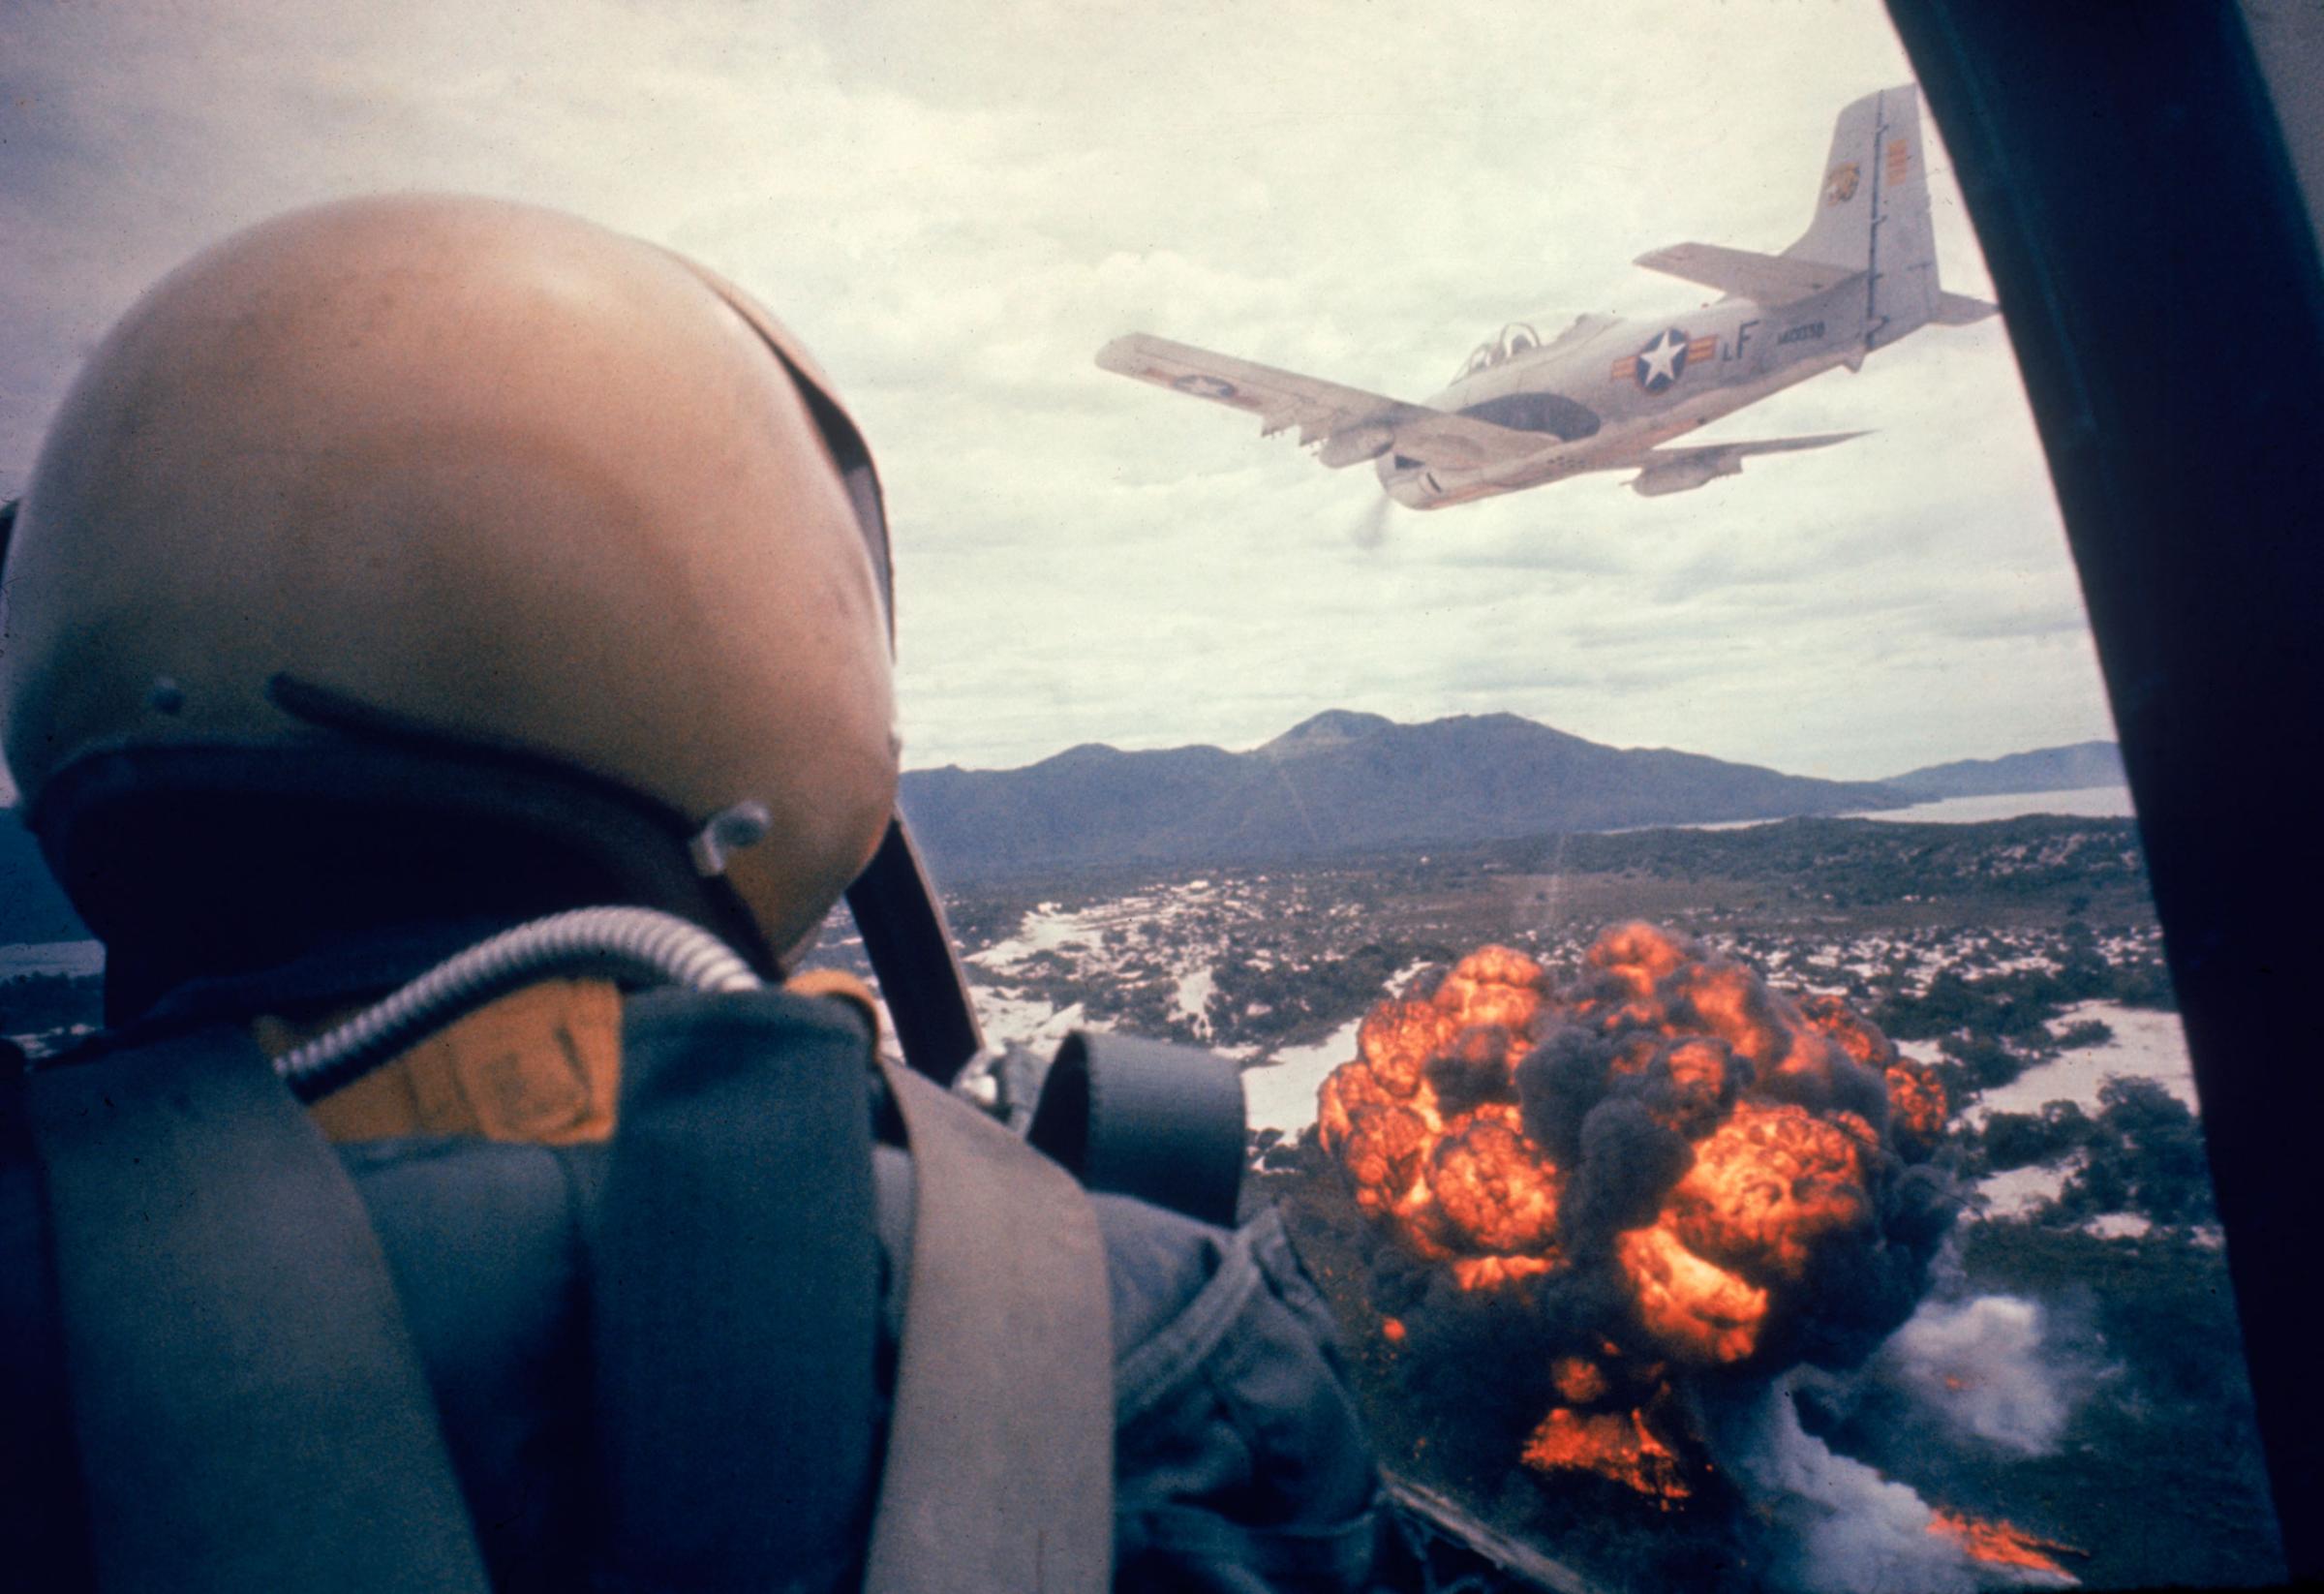 American jets drop napalm on Viet Cong positions early in the Vietnam conflict in 1963.